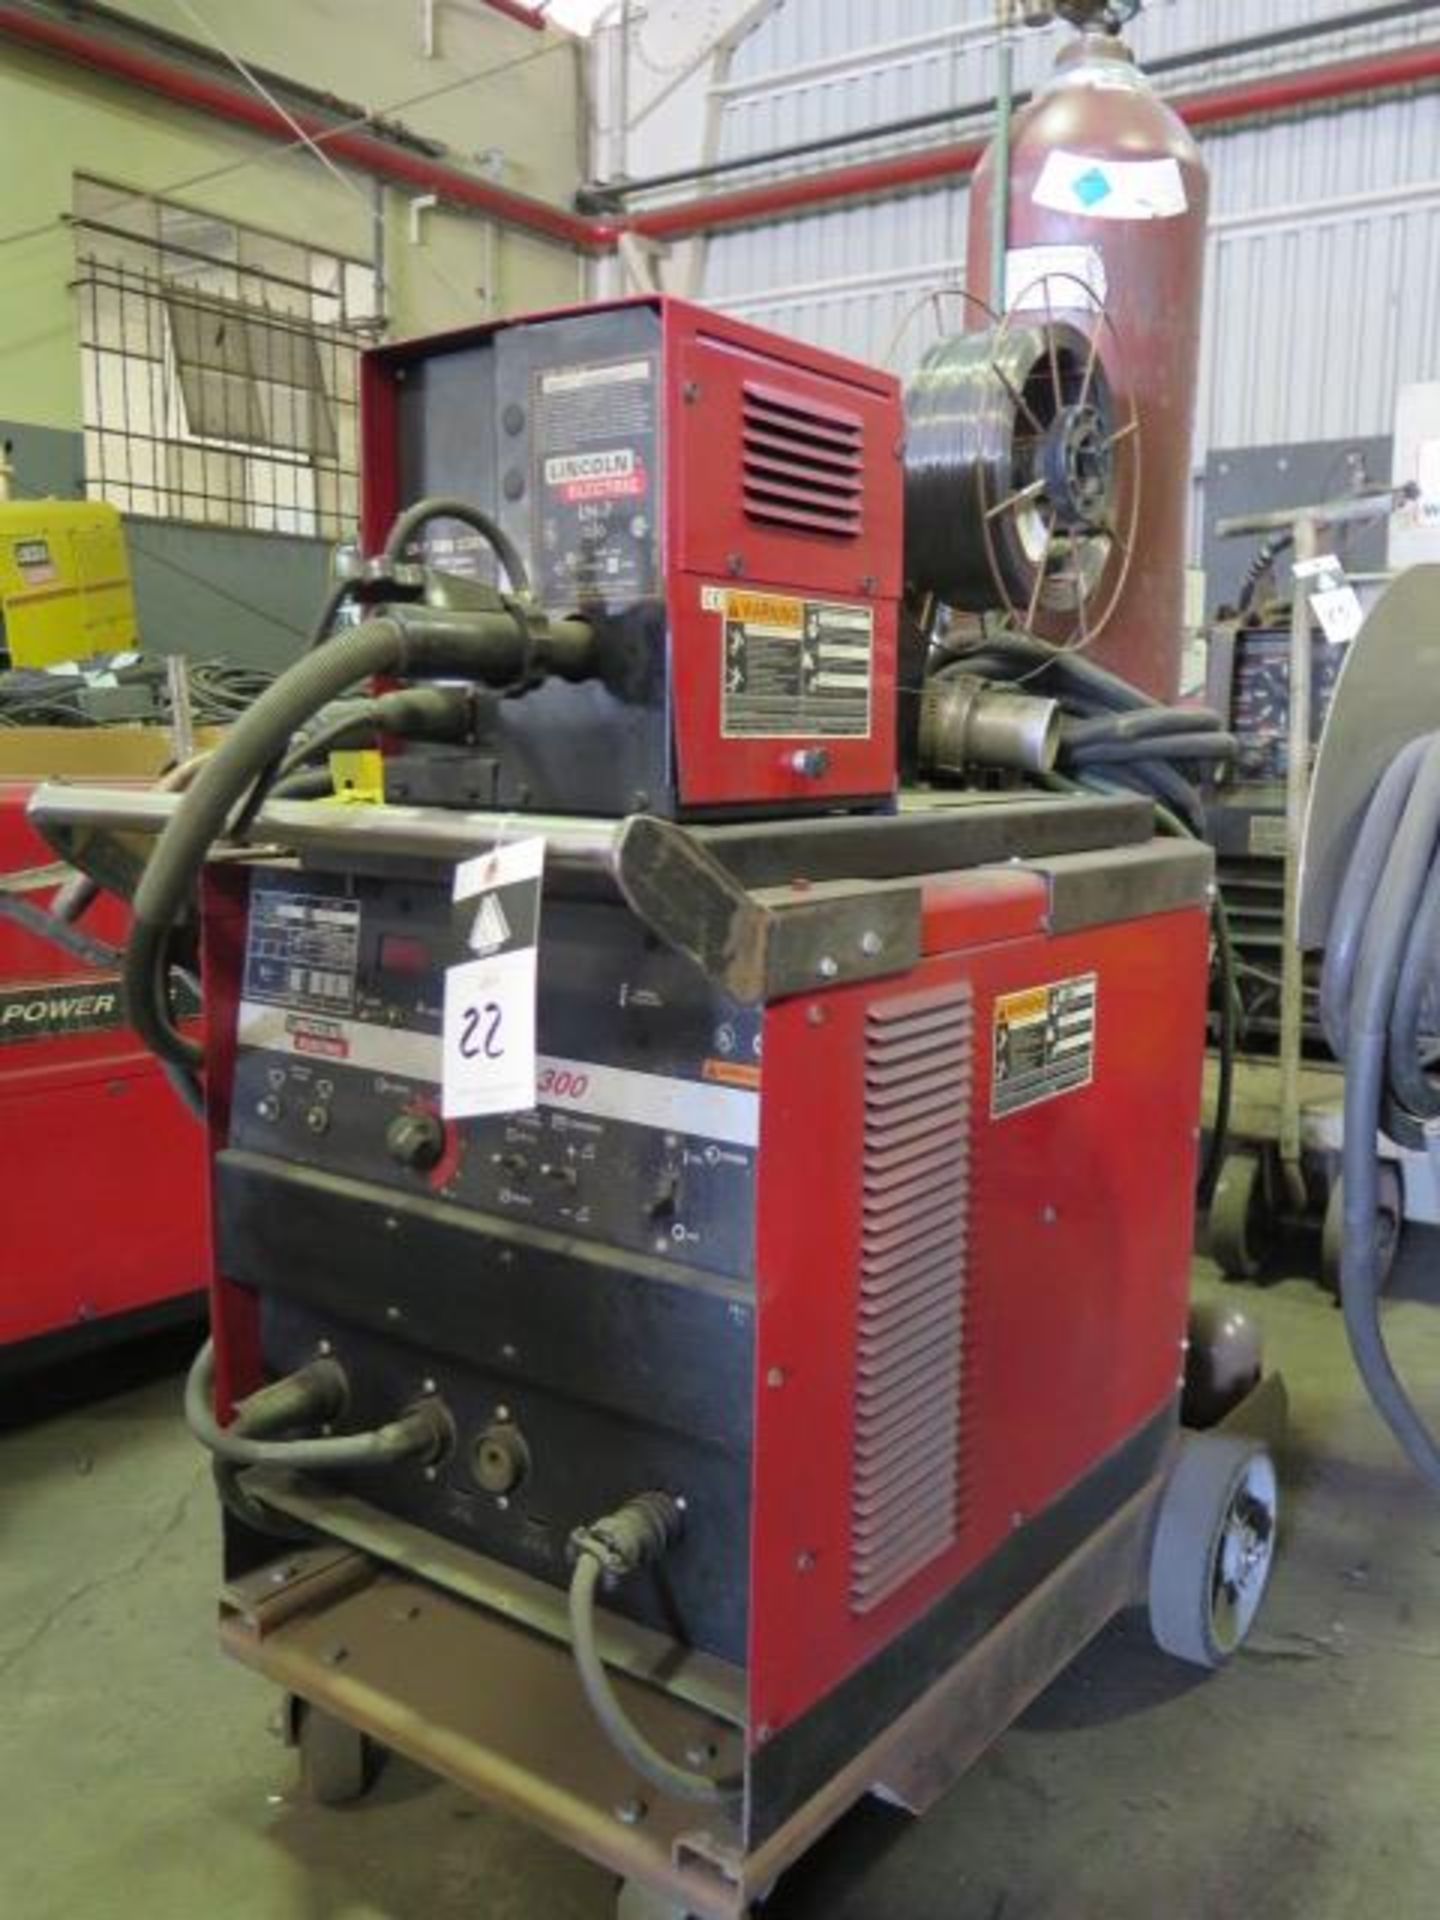 Lincoln CV-300 Arc Welding Power Source w/ Lincoln LN-7 Wire Feed (SOLD AS-IS - NO WARRANTY) - Image 2 of 12